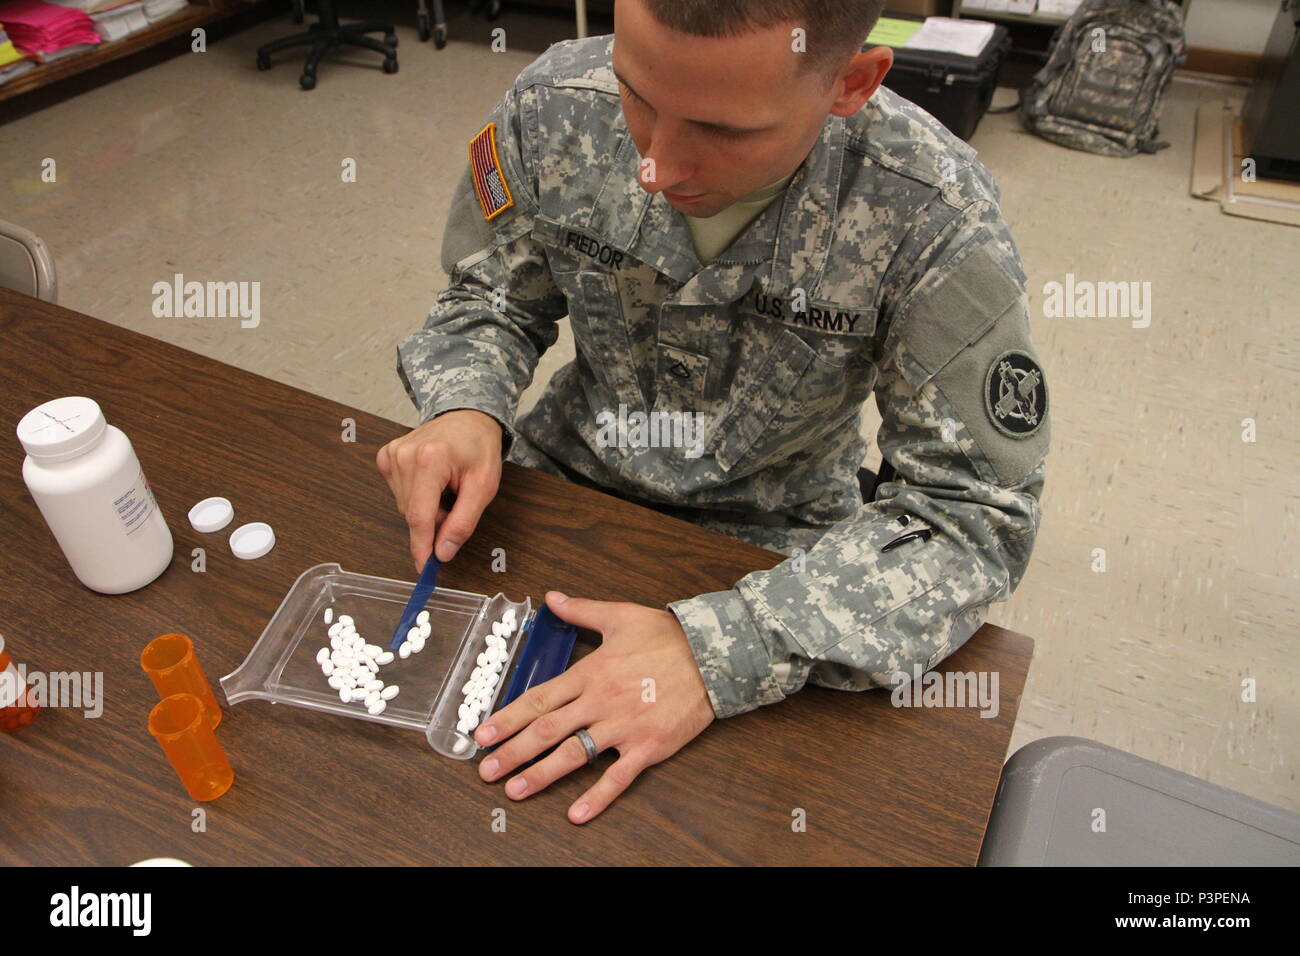 Pfc. Michael Fiedor, a pharmacy technician from Alpha Company, 48th Combat Support Hospital out of Fort Meade, Md., counts pills to fill a prescription during the Greater Chenango Cares Innovative Readiness Training event, July 20, 2016.  Greater Chenango Cares is one of the IRT events that provides real-world training in a joint civil-military environment while delivering world-class medical care to the people of Chenango County, N.Y., from July 15-24. Stock Photo